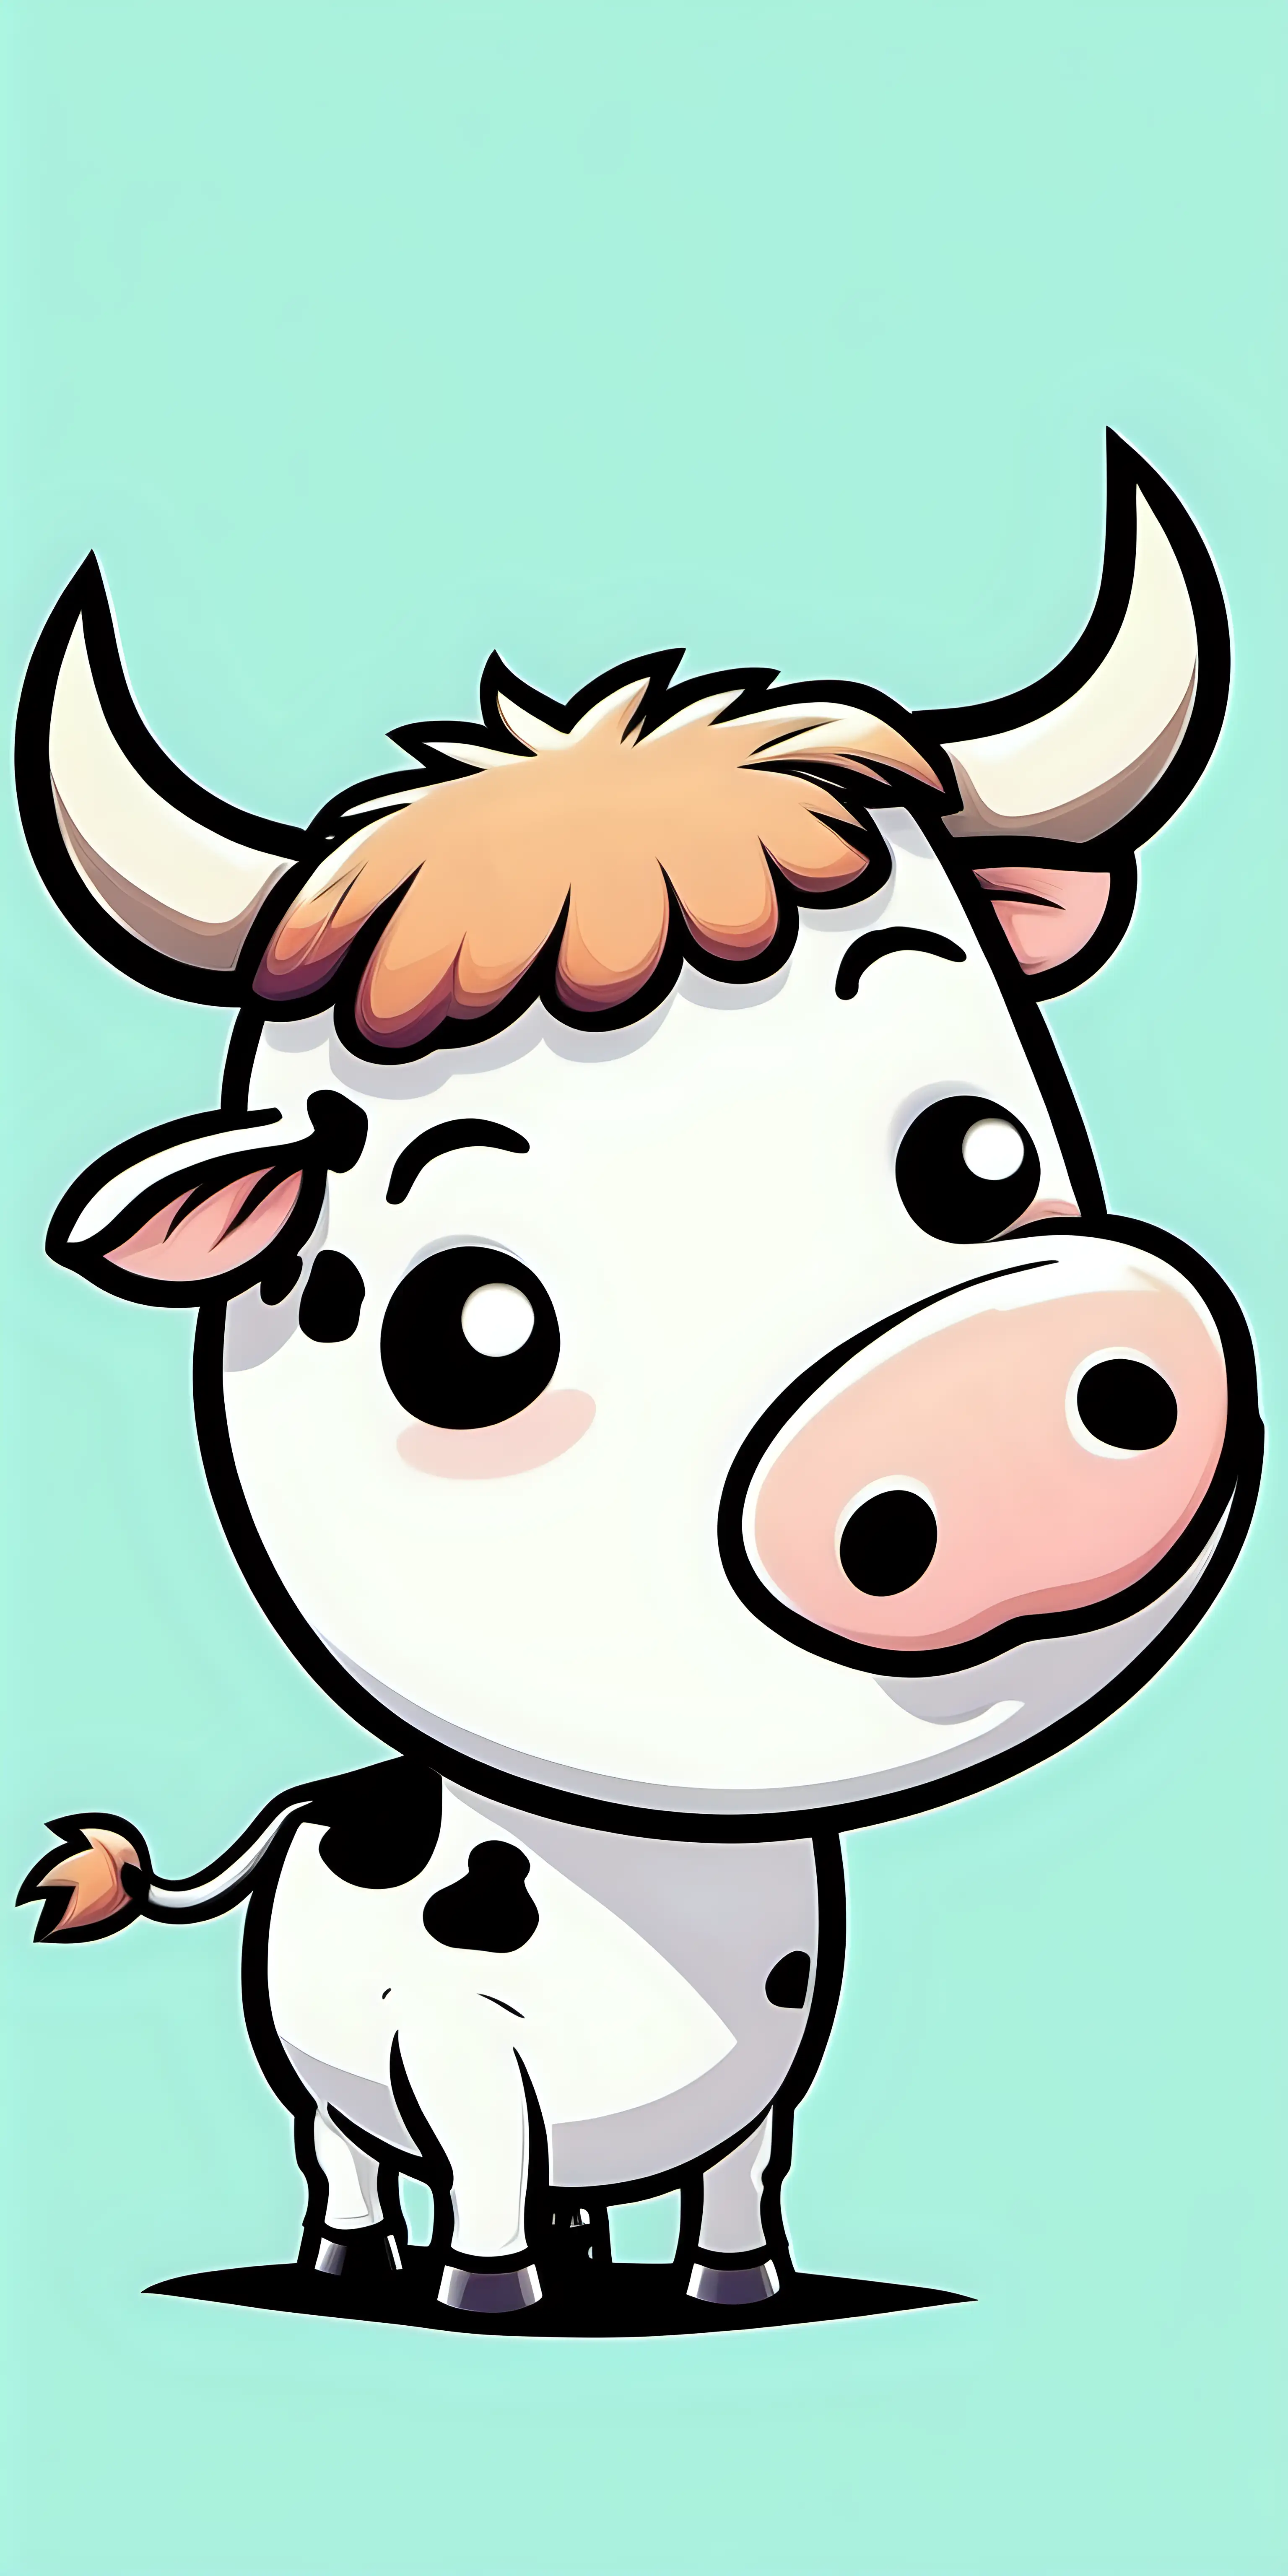 cow, comic style, sarcastic look on its face, kawaii, white background